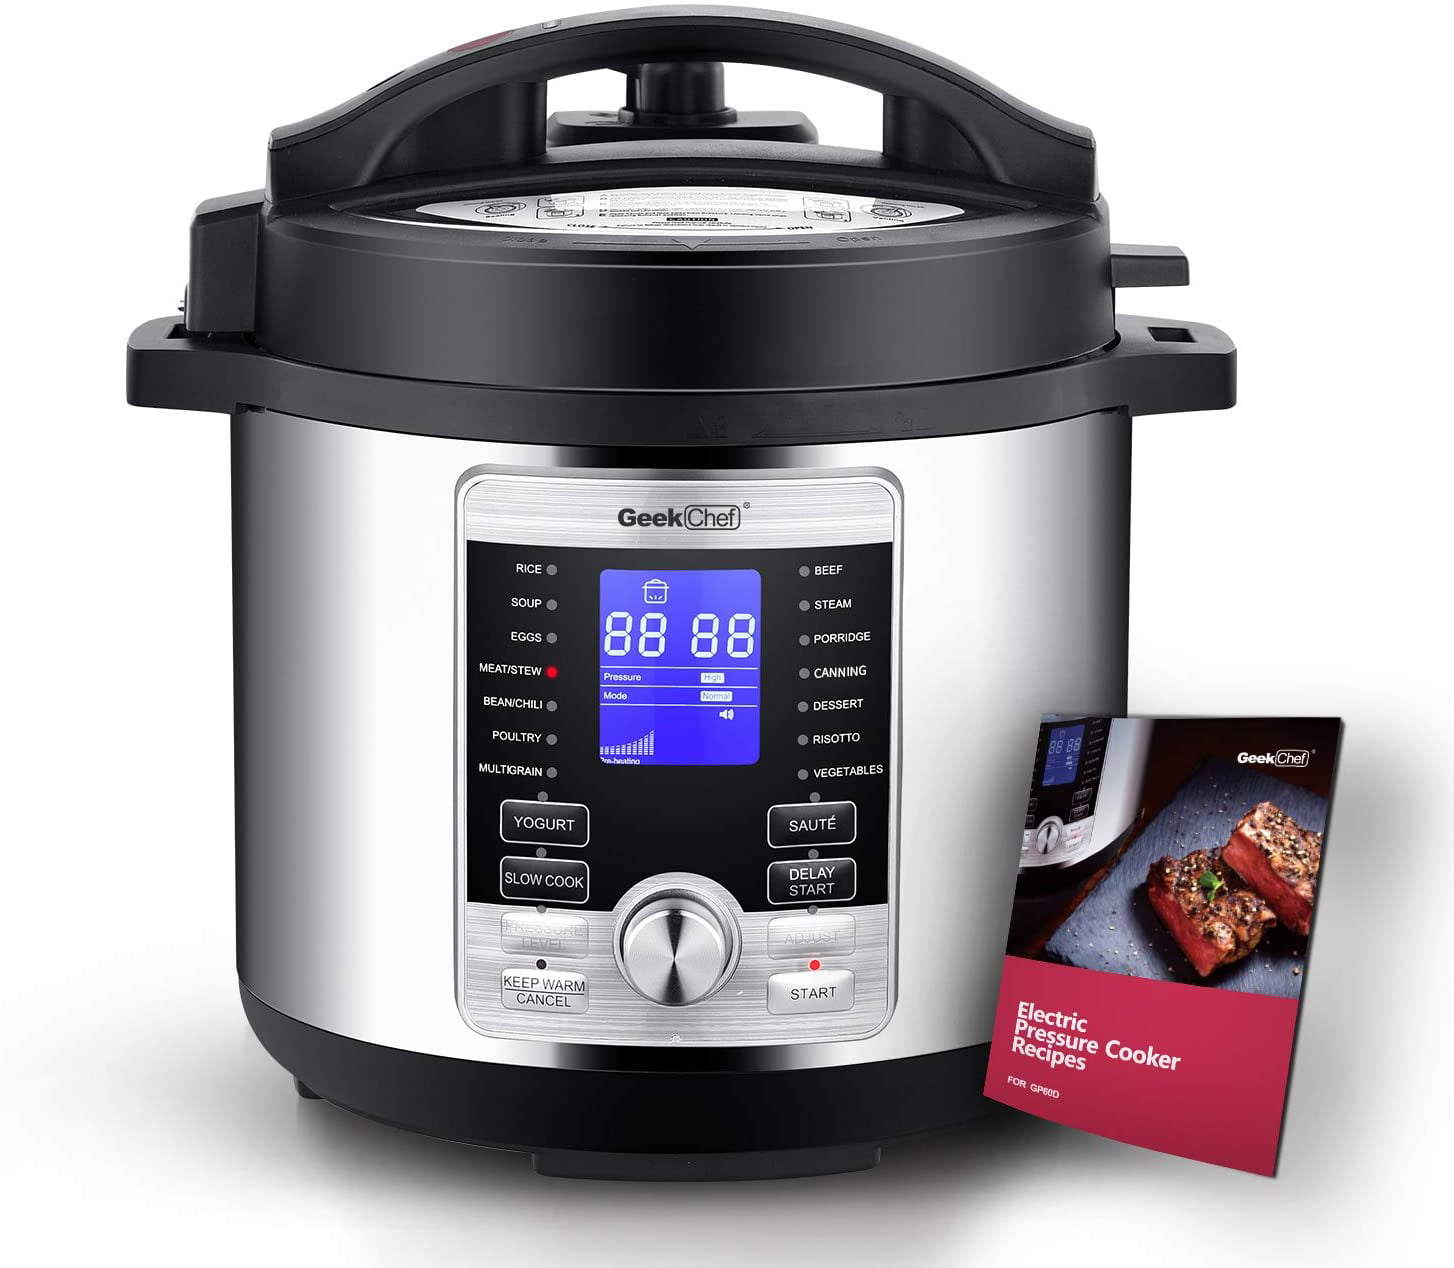  Rice Cooker with Steamer (2-6L) 304 Stainless Steel